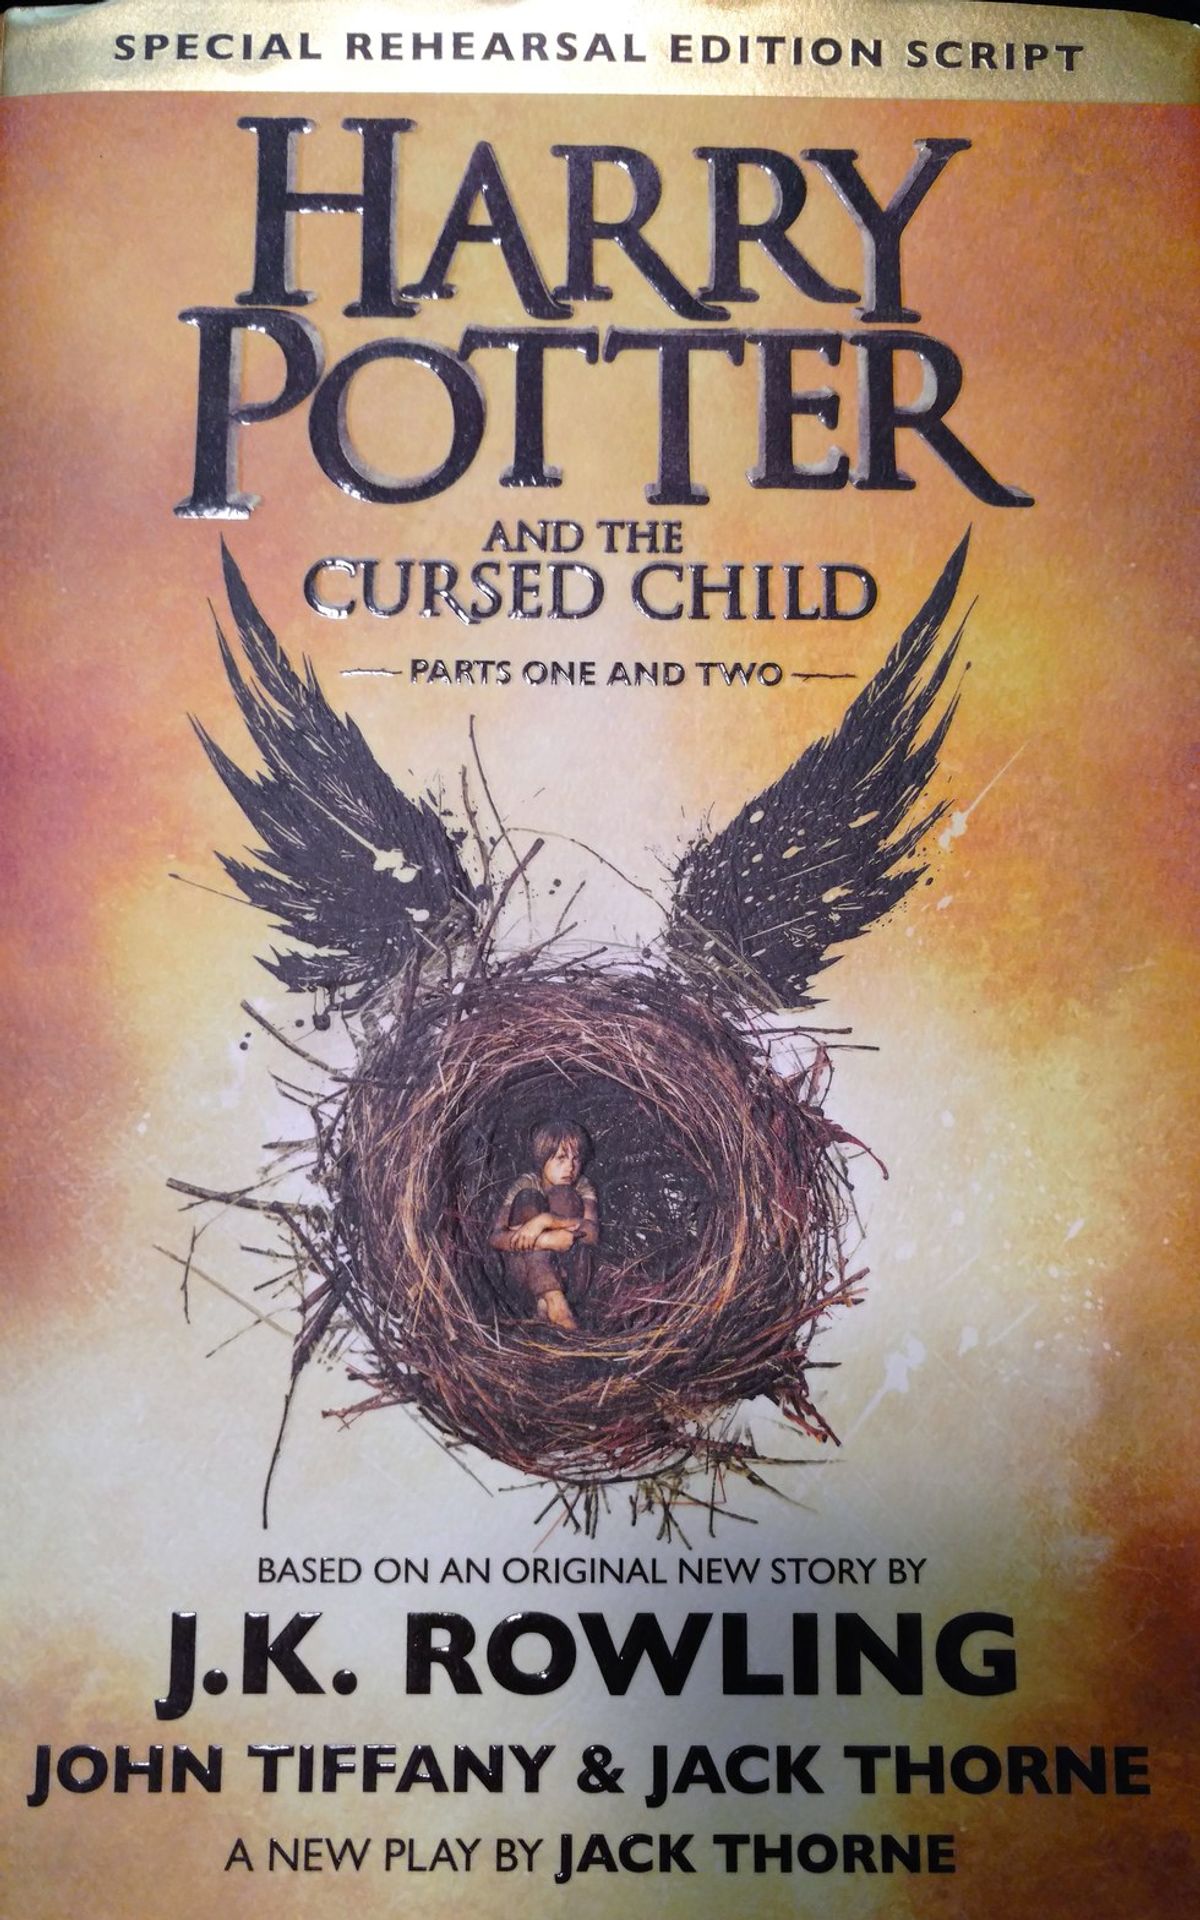 5 Reasons 'Harry Potter' Spin-Off 'The Cursed Child' Hits A Dark Mark